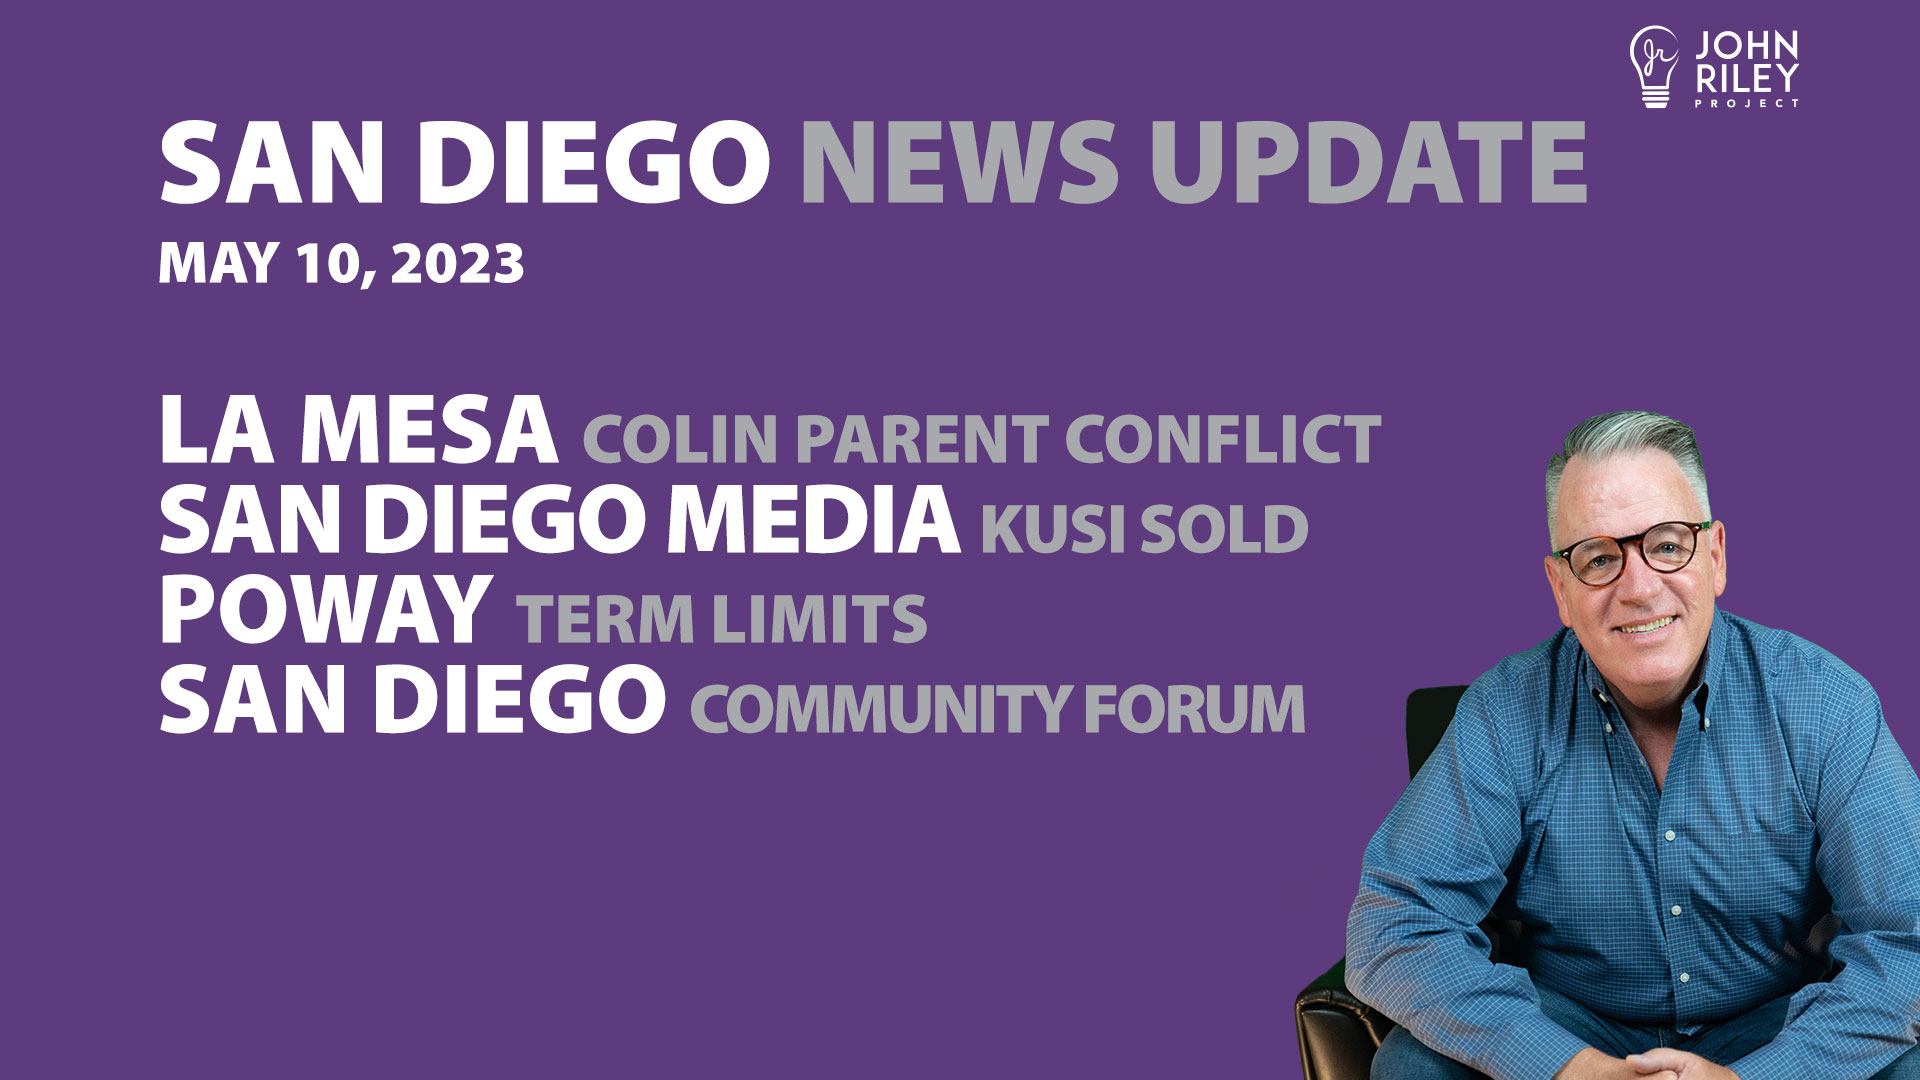 John Riley discusses San Diego News Update May 10: La Mesa Colin Parent Conflict, KUSI Sold, Poway Term Limits